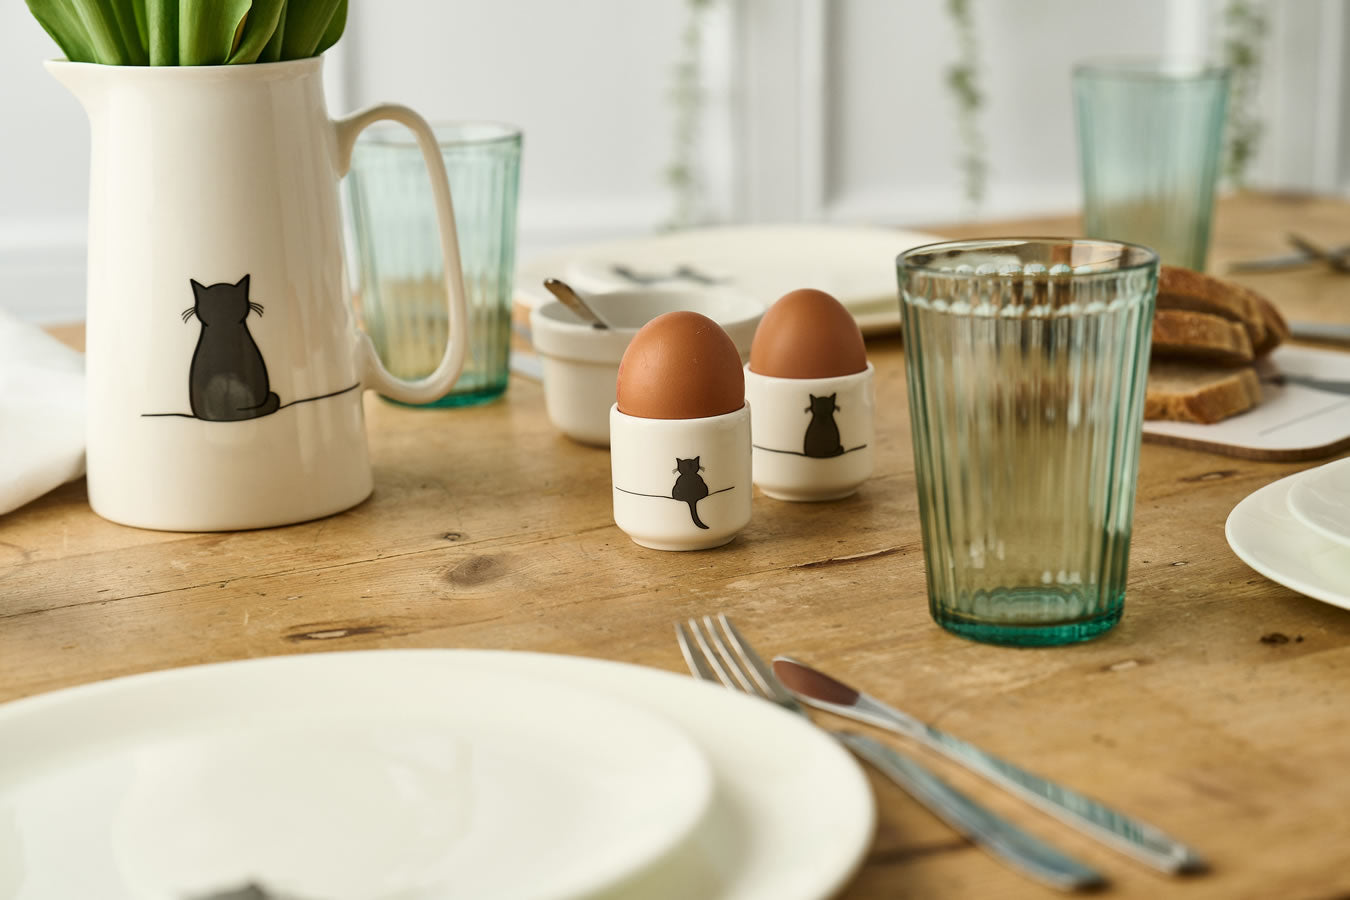 Crouching Cat Egg Cup and Sitting Cat Jug